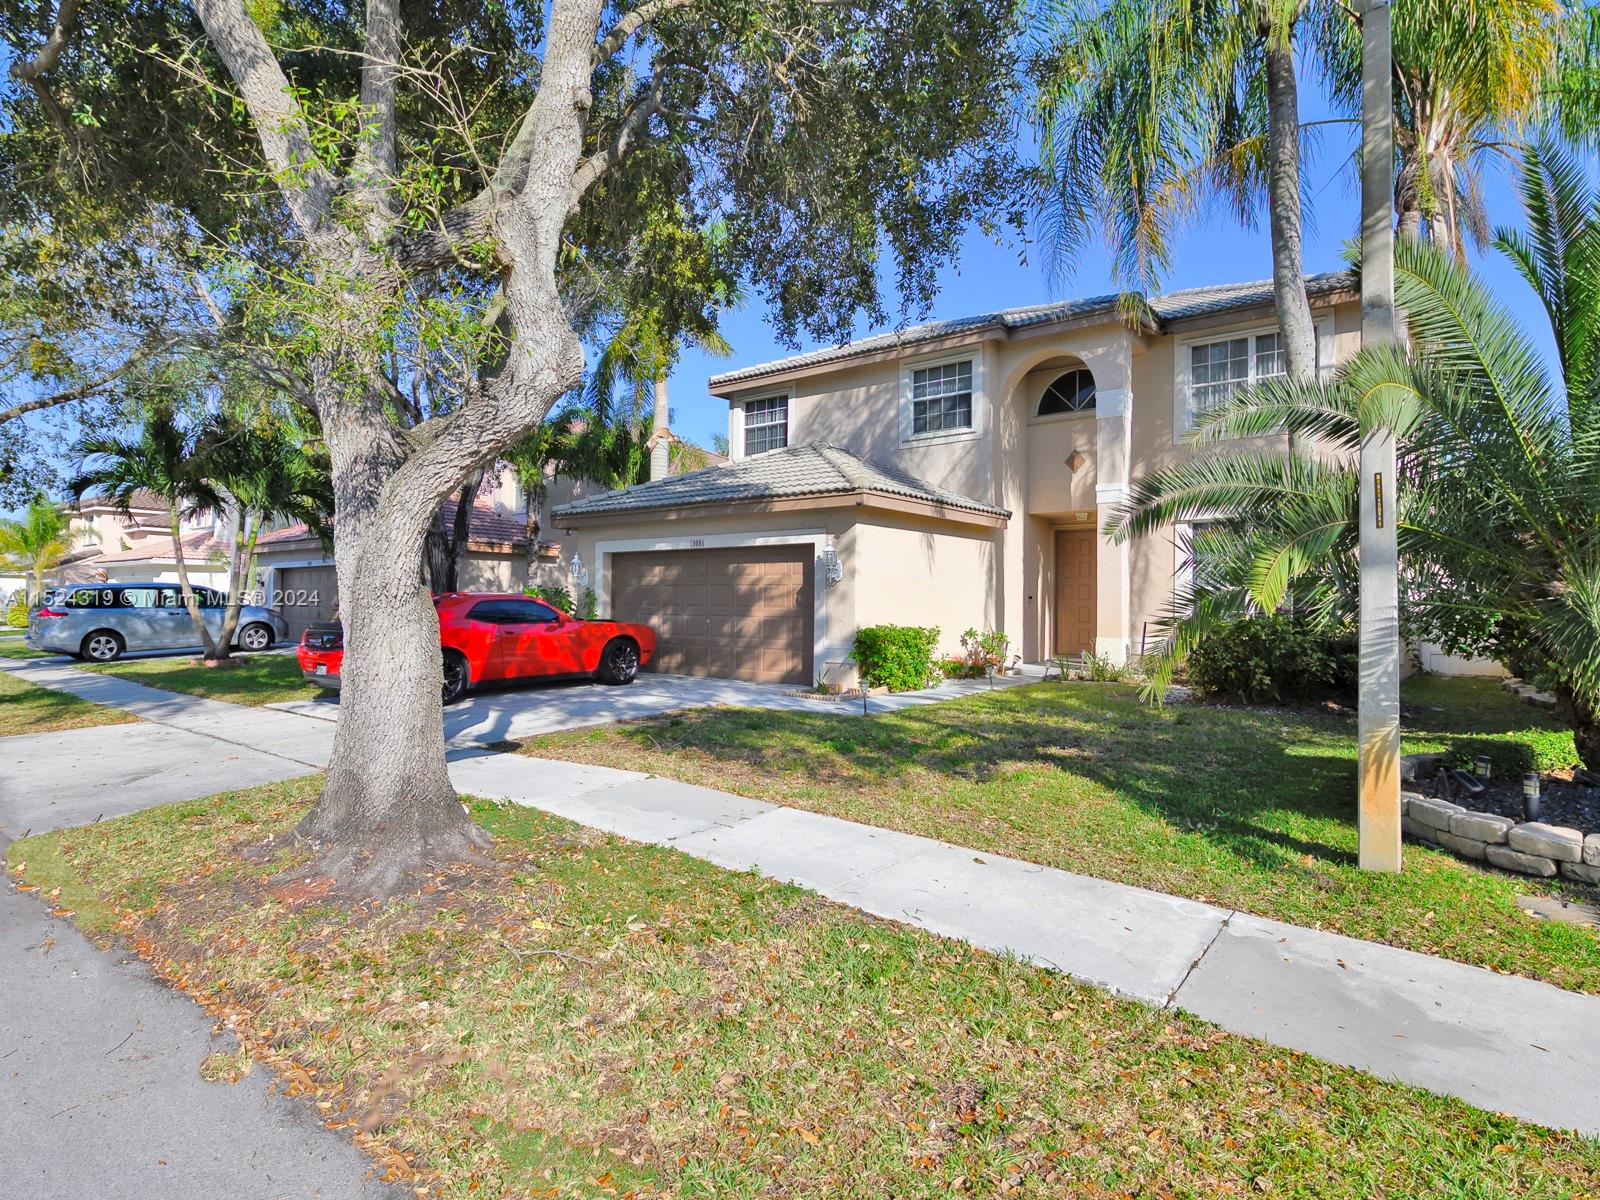 18086 SW 29th St, Miramar, Florida 33029, 4 Bedrooms Bedrooms, ,2 BathroomsBathrooms,Residential,For Sale,18086 SW 29th St,A11524319